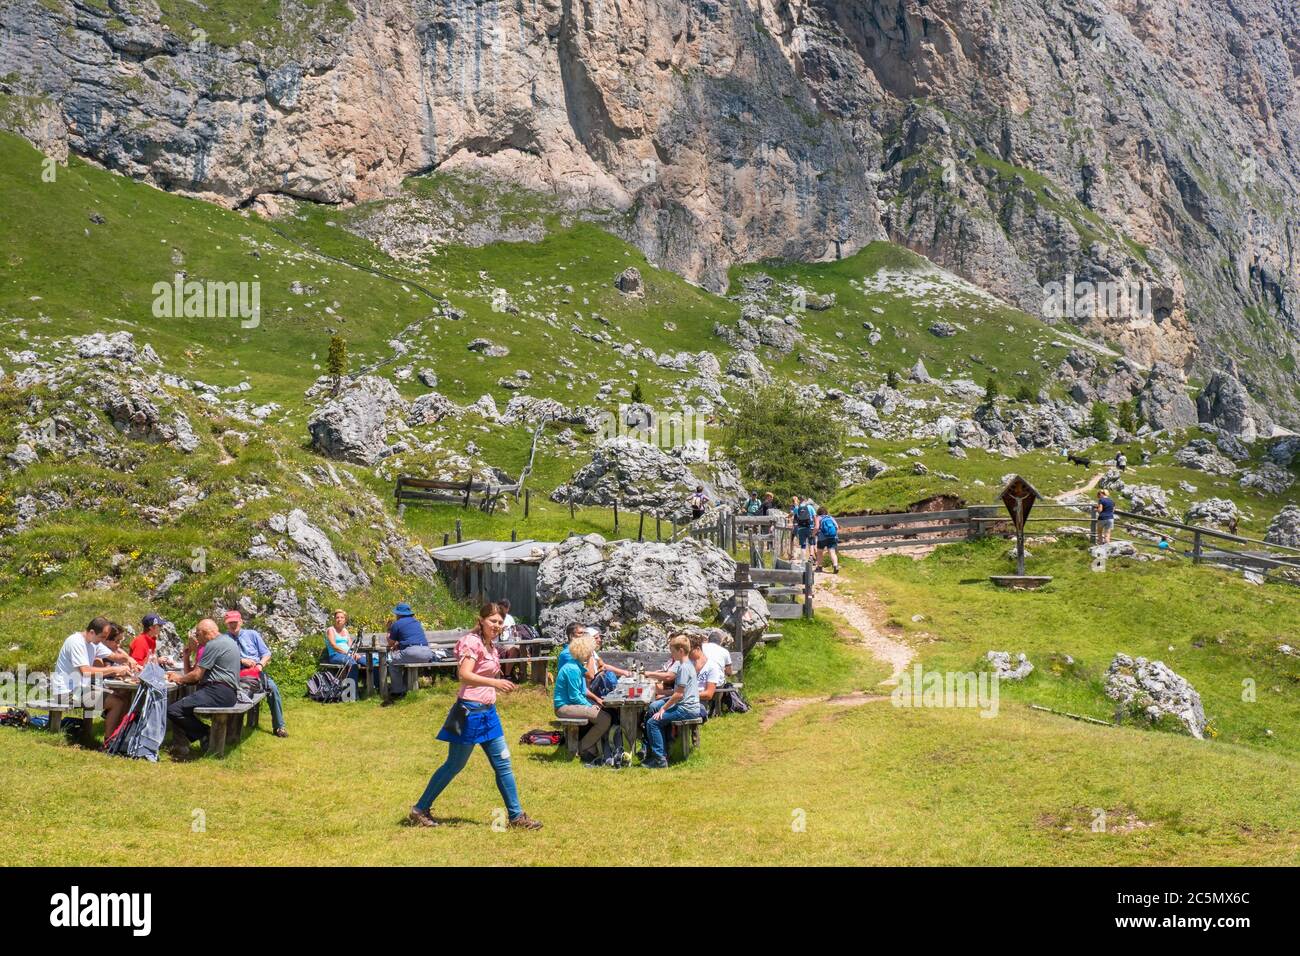 Resting area for Mountain hikers in the dolomites Stock Photo